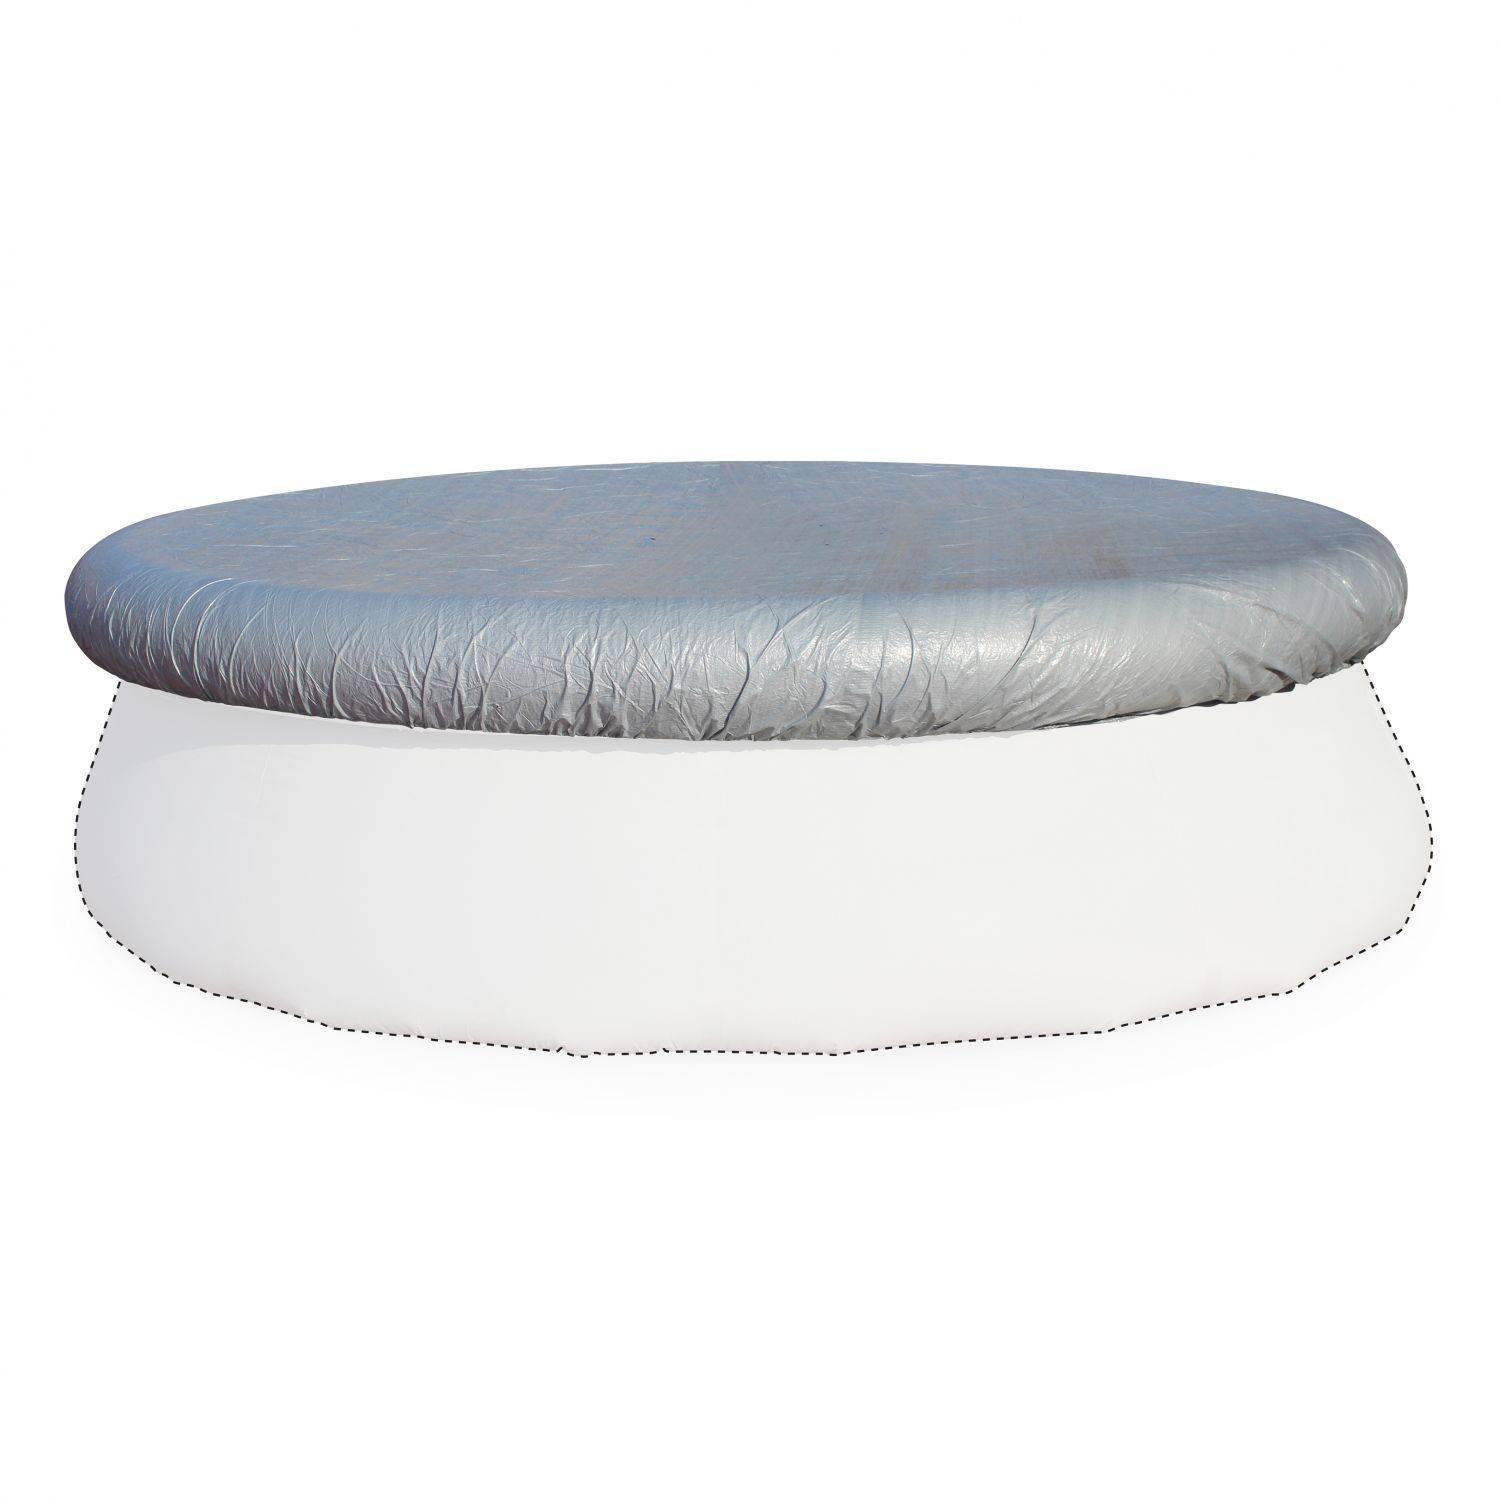 Grey Ø330cm protective cover for Ø300cm round above ground pool, cover for Agate swimming pool Photo1